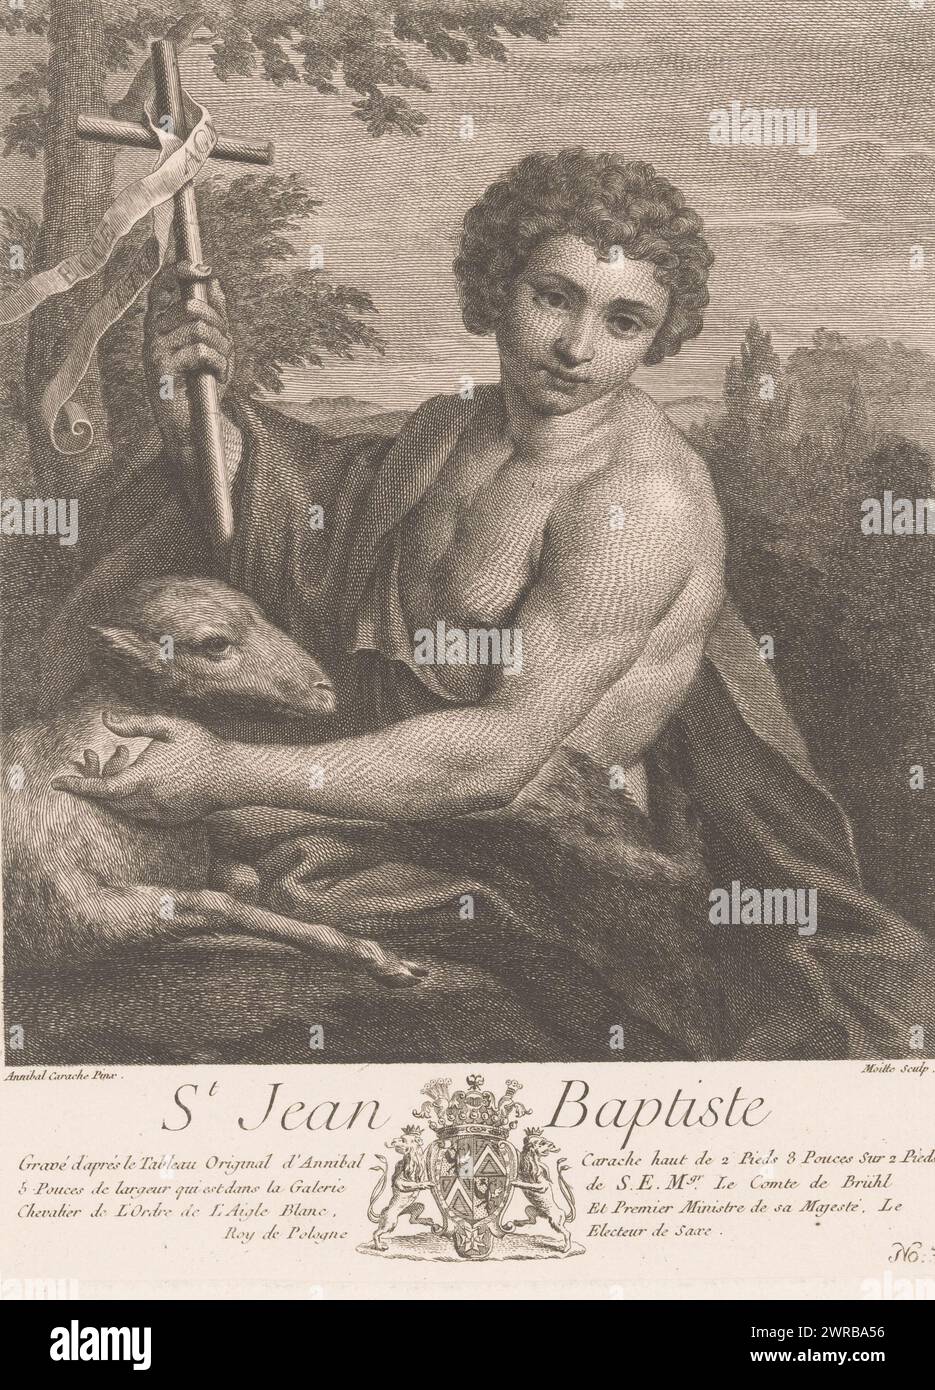 H. John the Baptist, Etchings after paintings from the Brühl collection (series title), Recueil d'estampes engravées d'après les tableaux de la Galerie de S.E.M. le Comte de Brühl (series title), Numbered bottom right: 38., print maker: Pierre Etienne Moitte, after painting by: Annibale Carracci, 1754, paper, engraving, etching, height 276 mm × width 209 mm, print Stock Photo